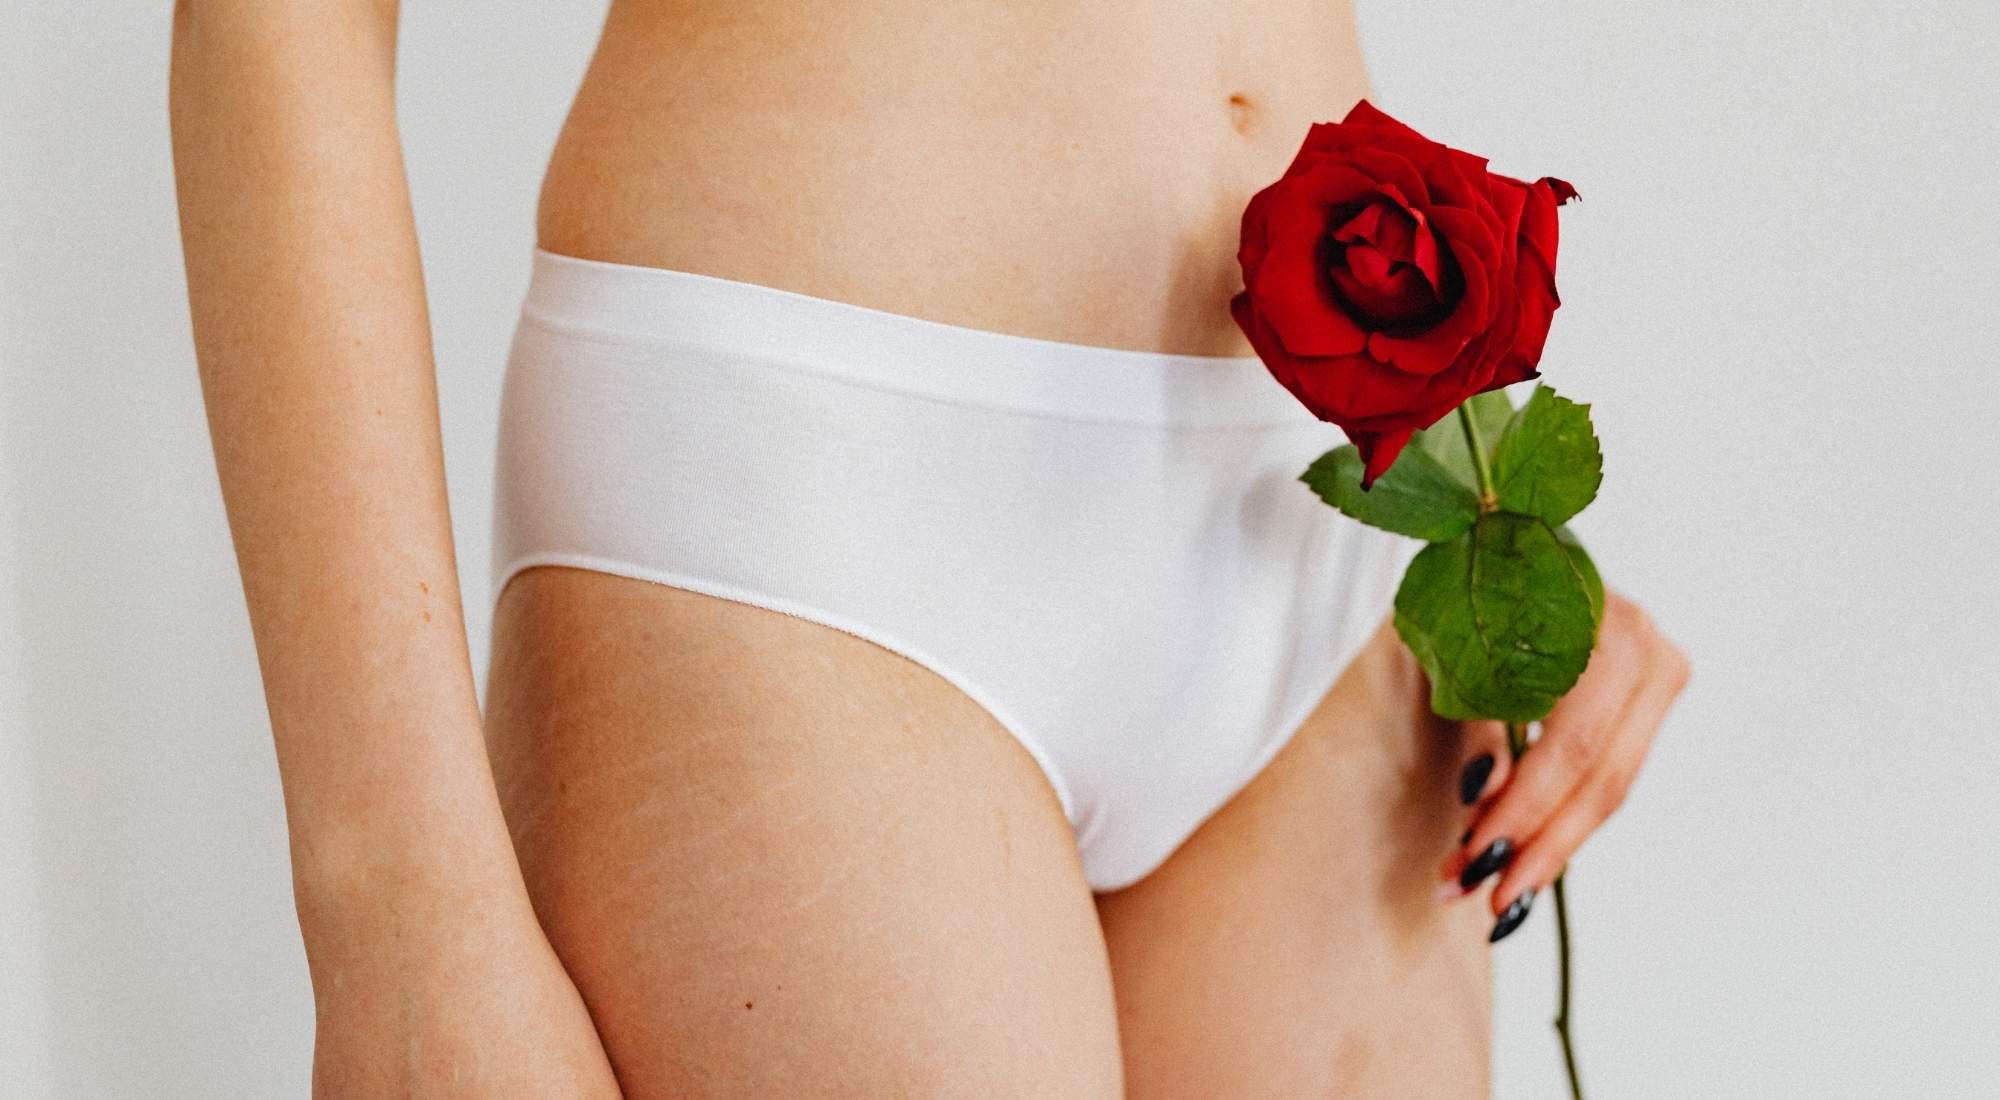 How to Get Period Blood Out of Underwear?